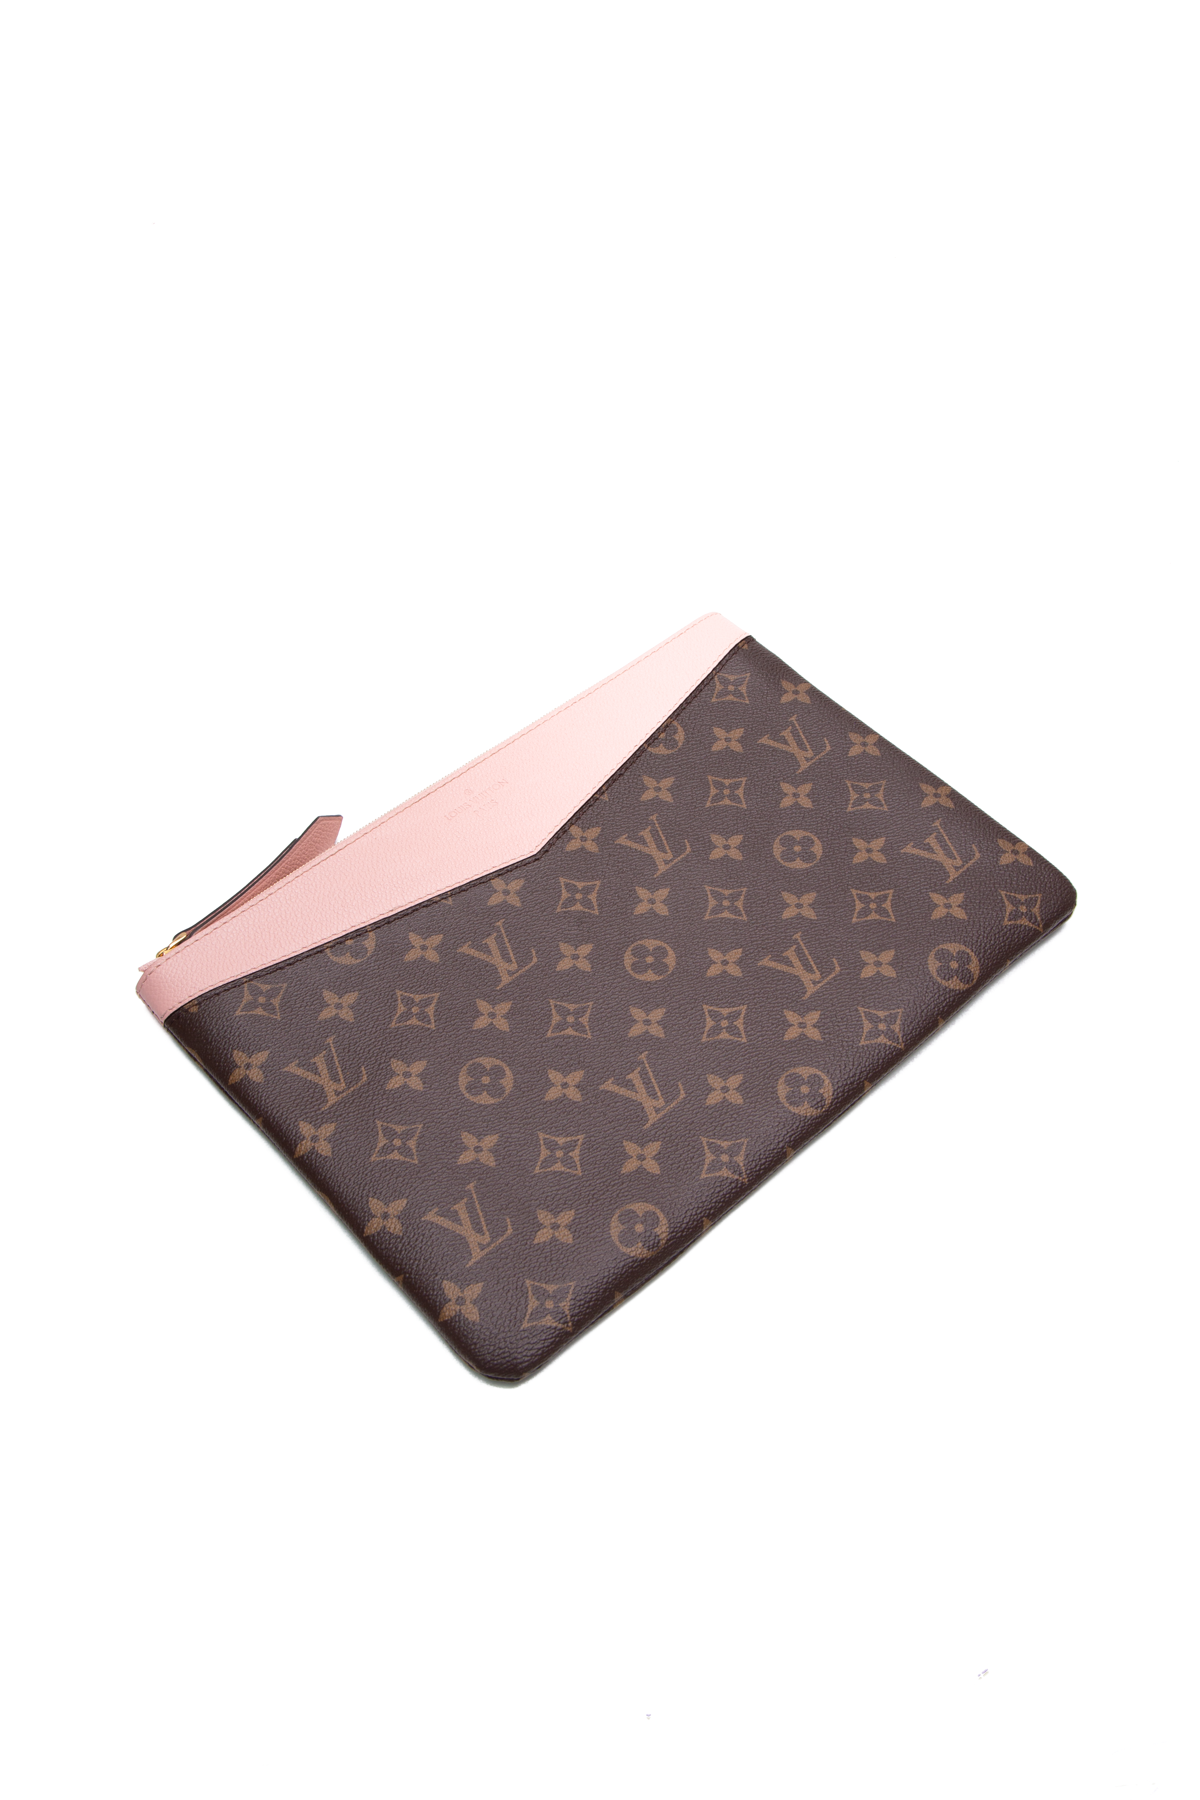 LOUIS VUITTON Daily pouch • Condition - Excellent • Price $980